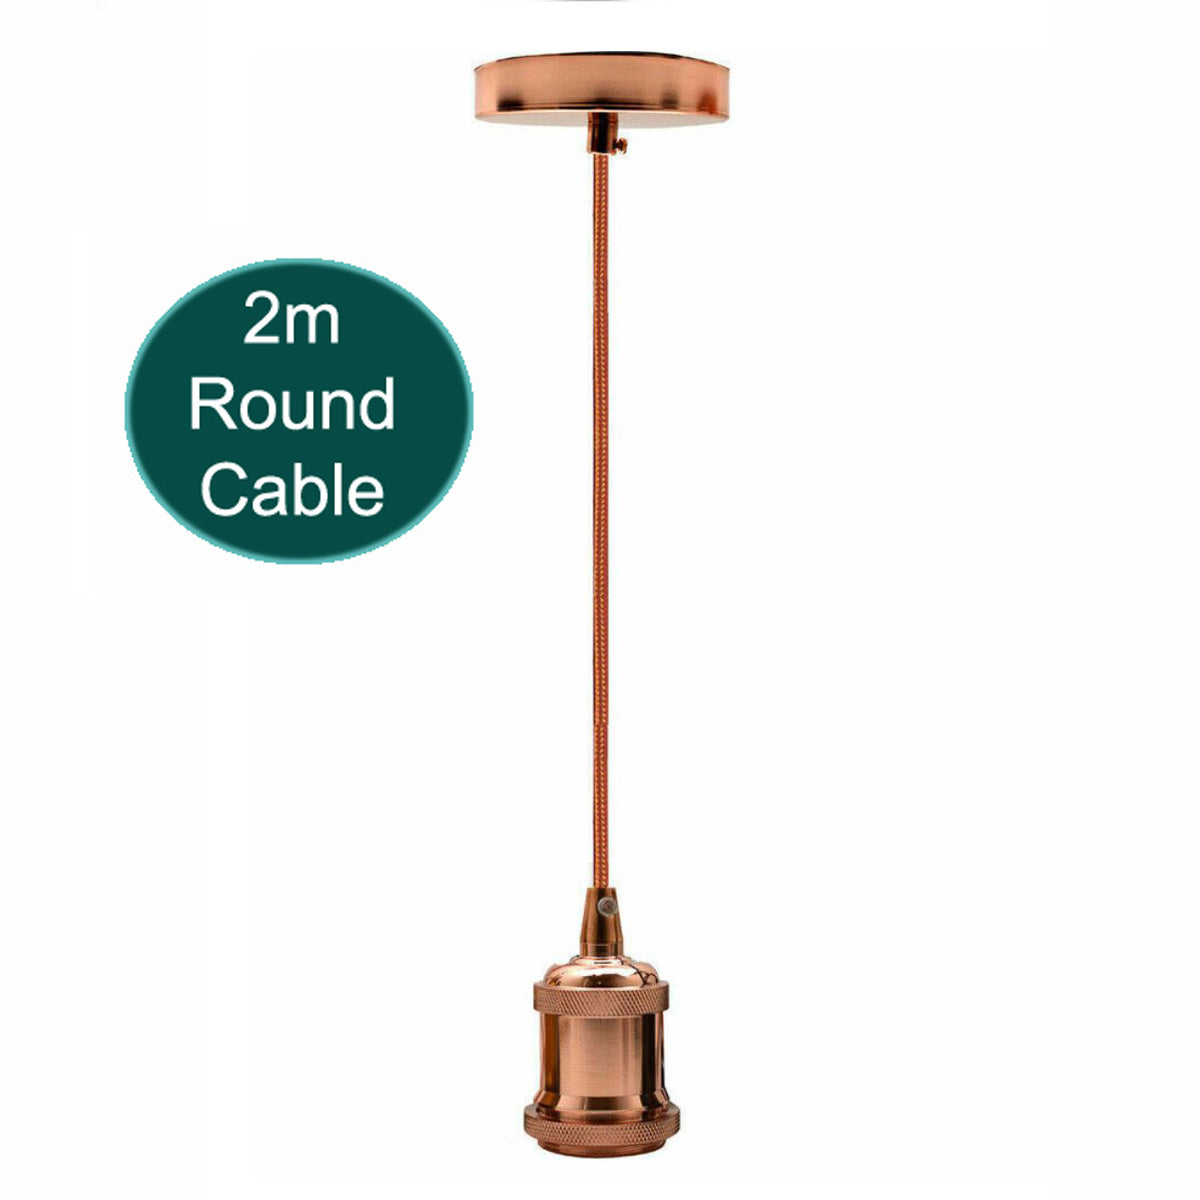 2m Round Cable E27 Base Rose Gold Holder~1722